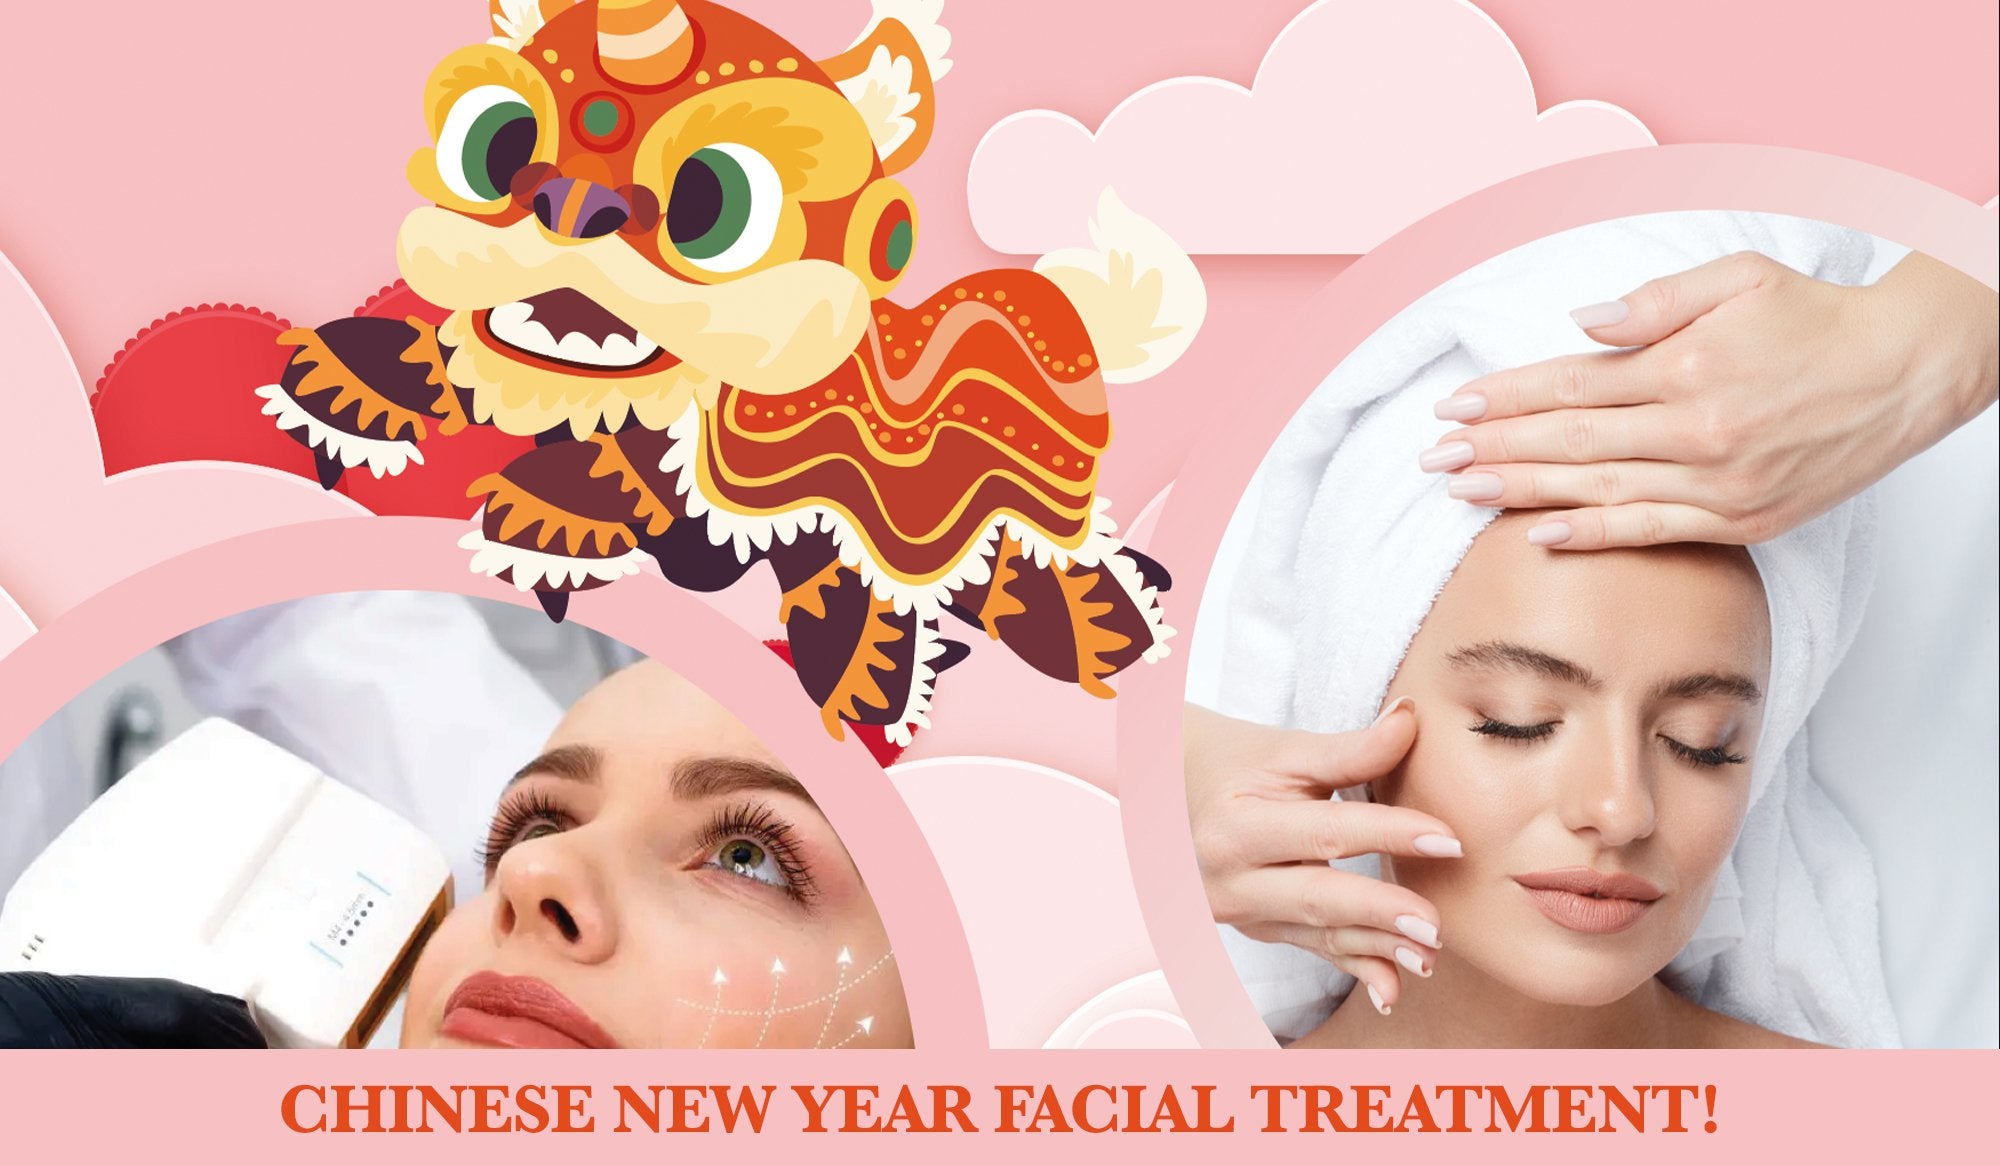 Chinese New Year facial treatment! - Beaubelle Asia-Pacific